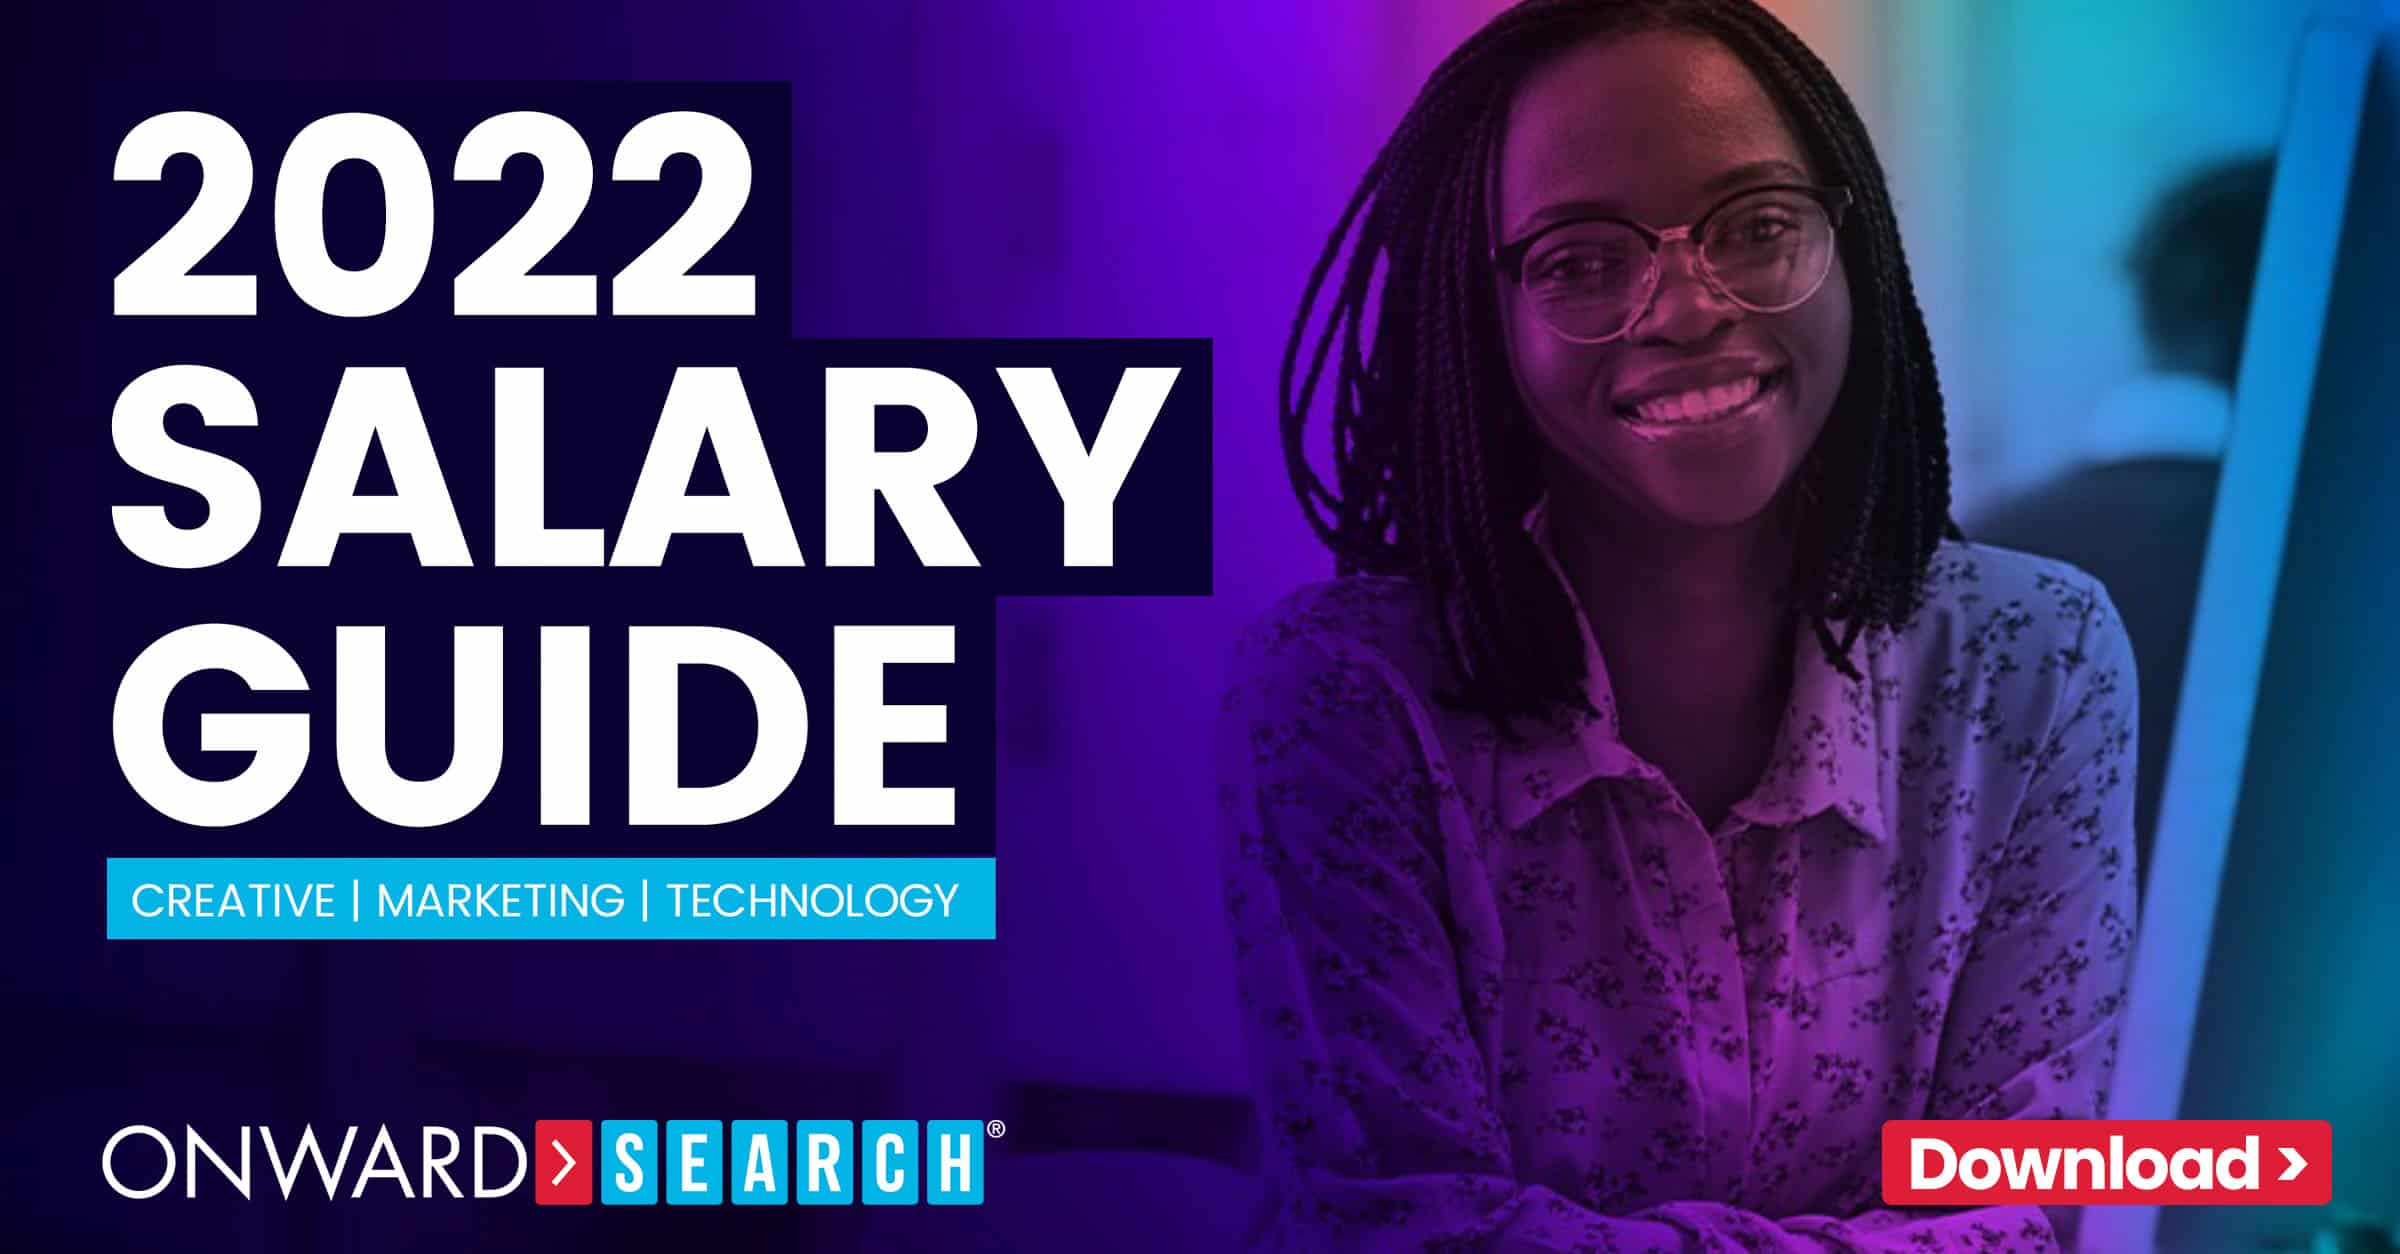 Download 2022 Salary Guide